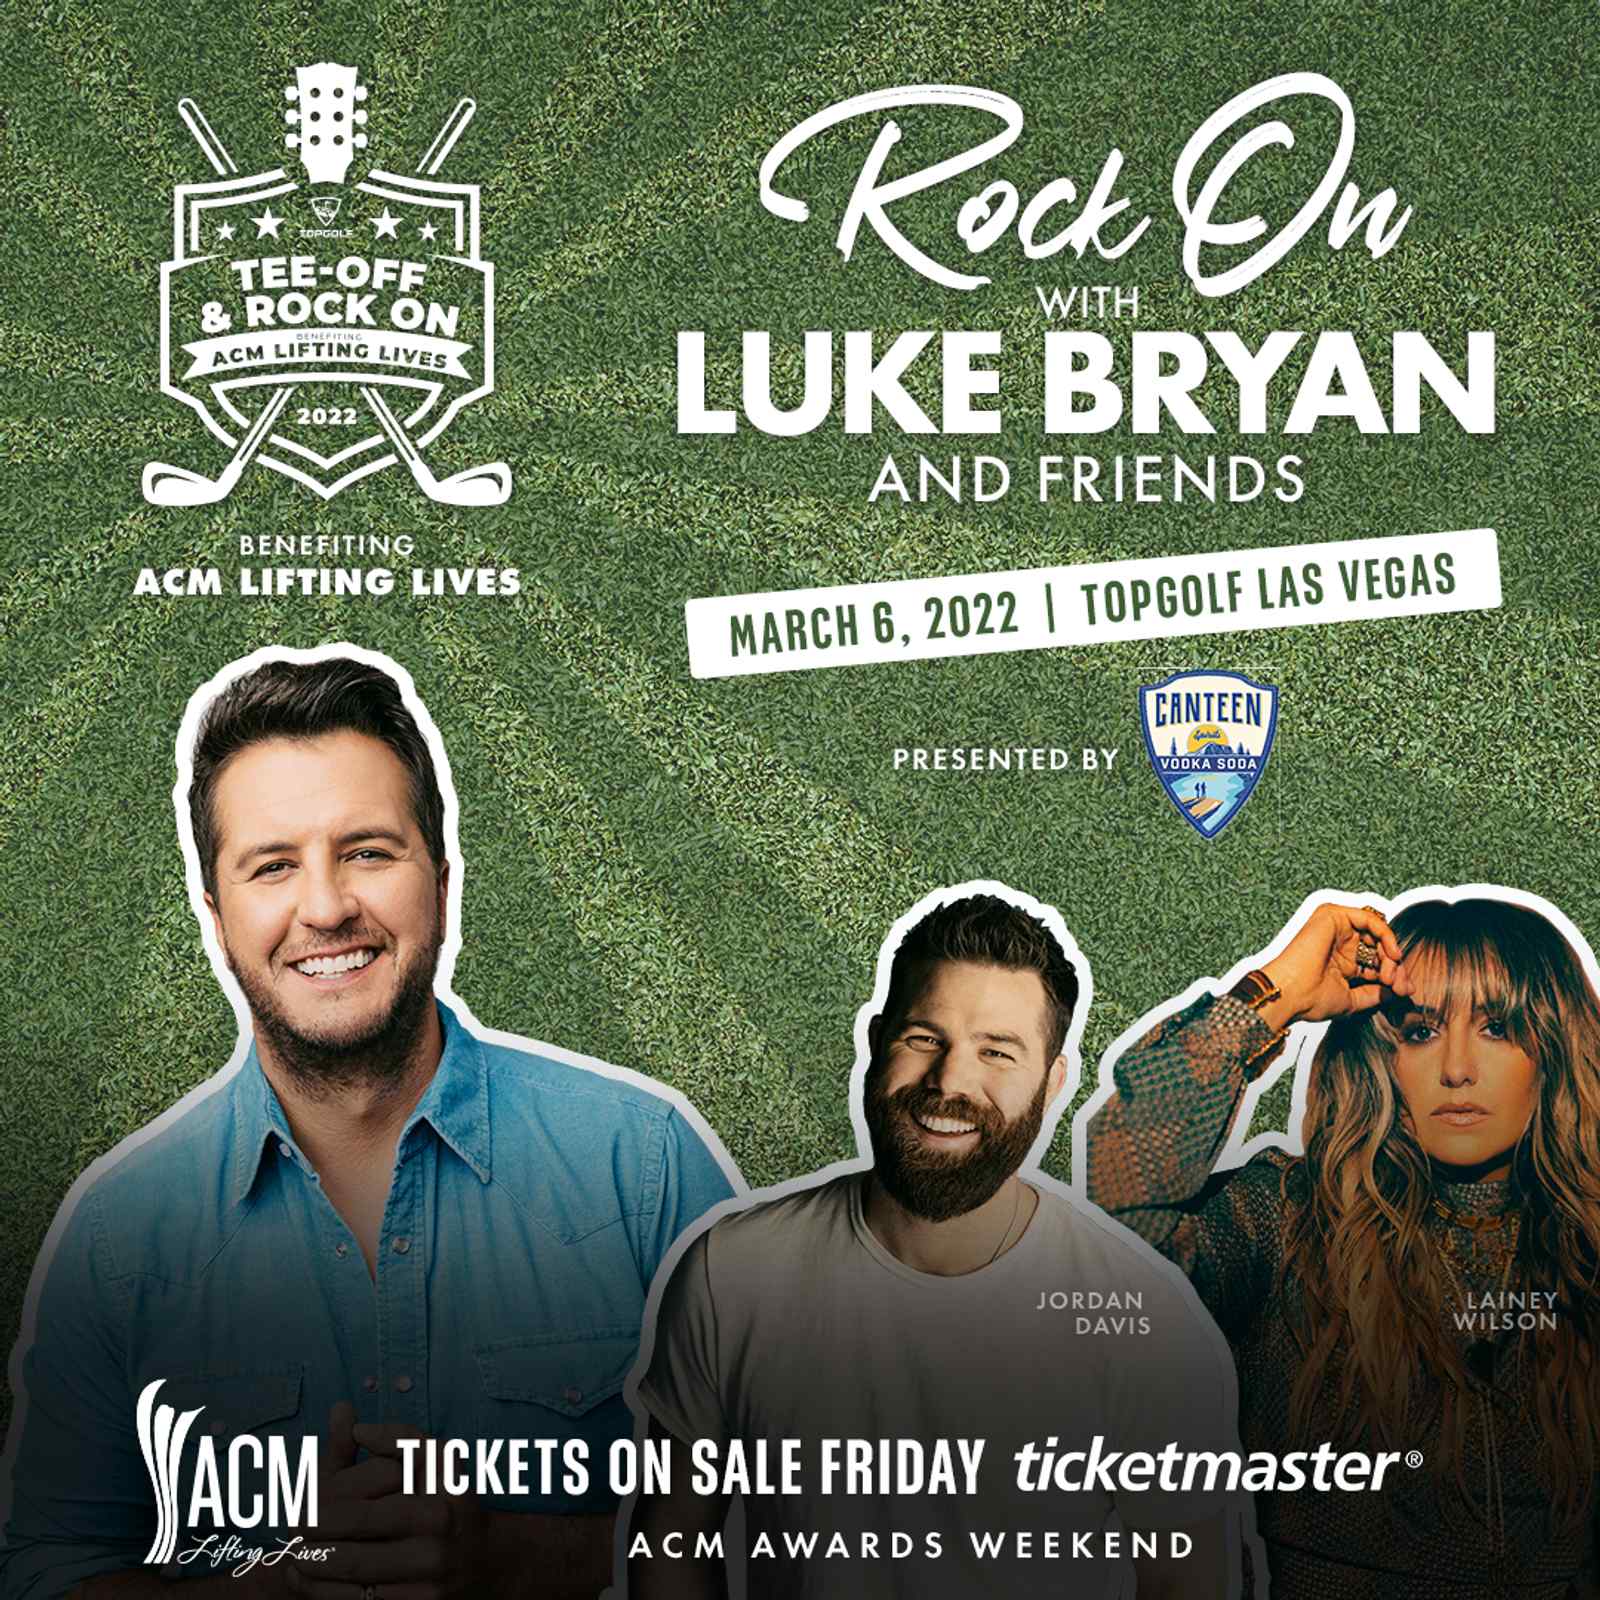 Topgolf Tee-Off & Rock On Presented by Canteen Spirits